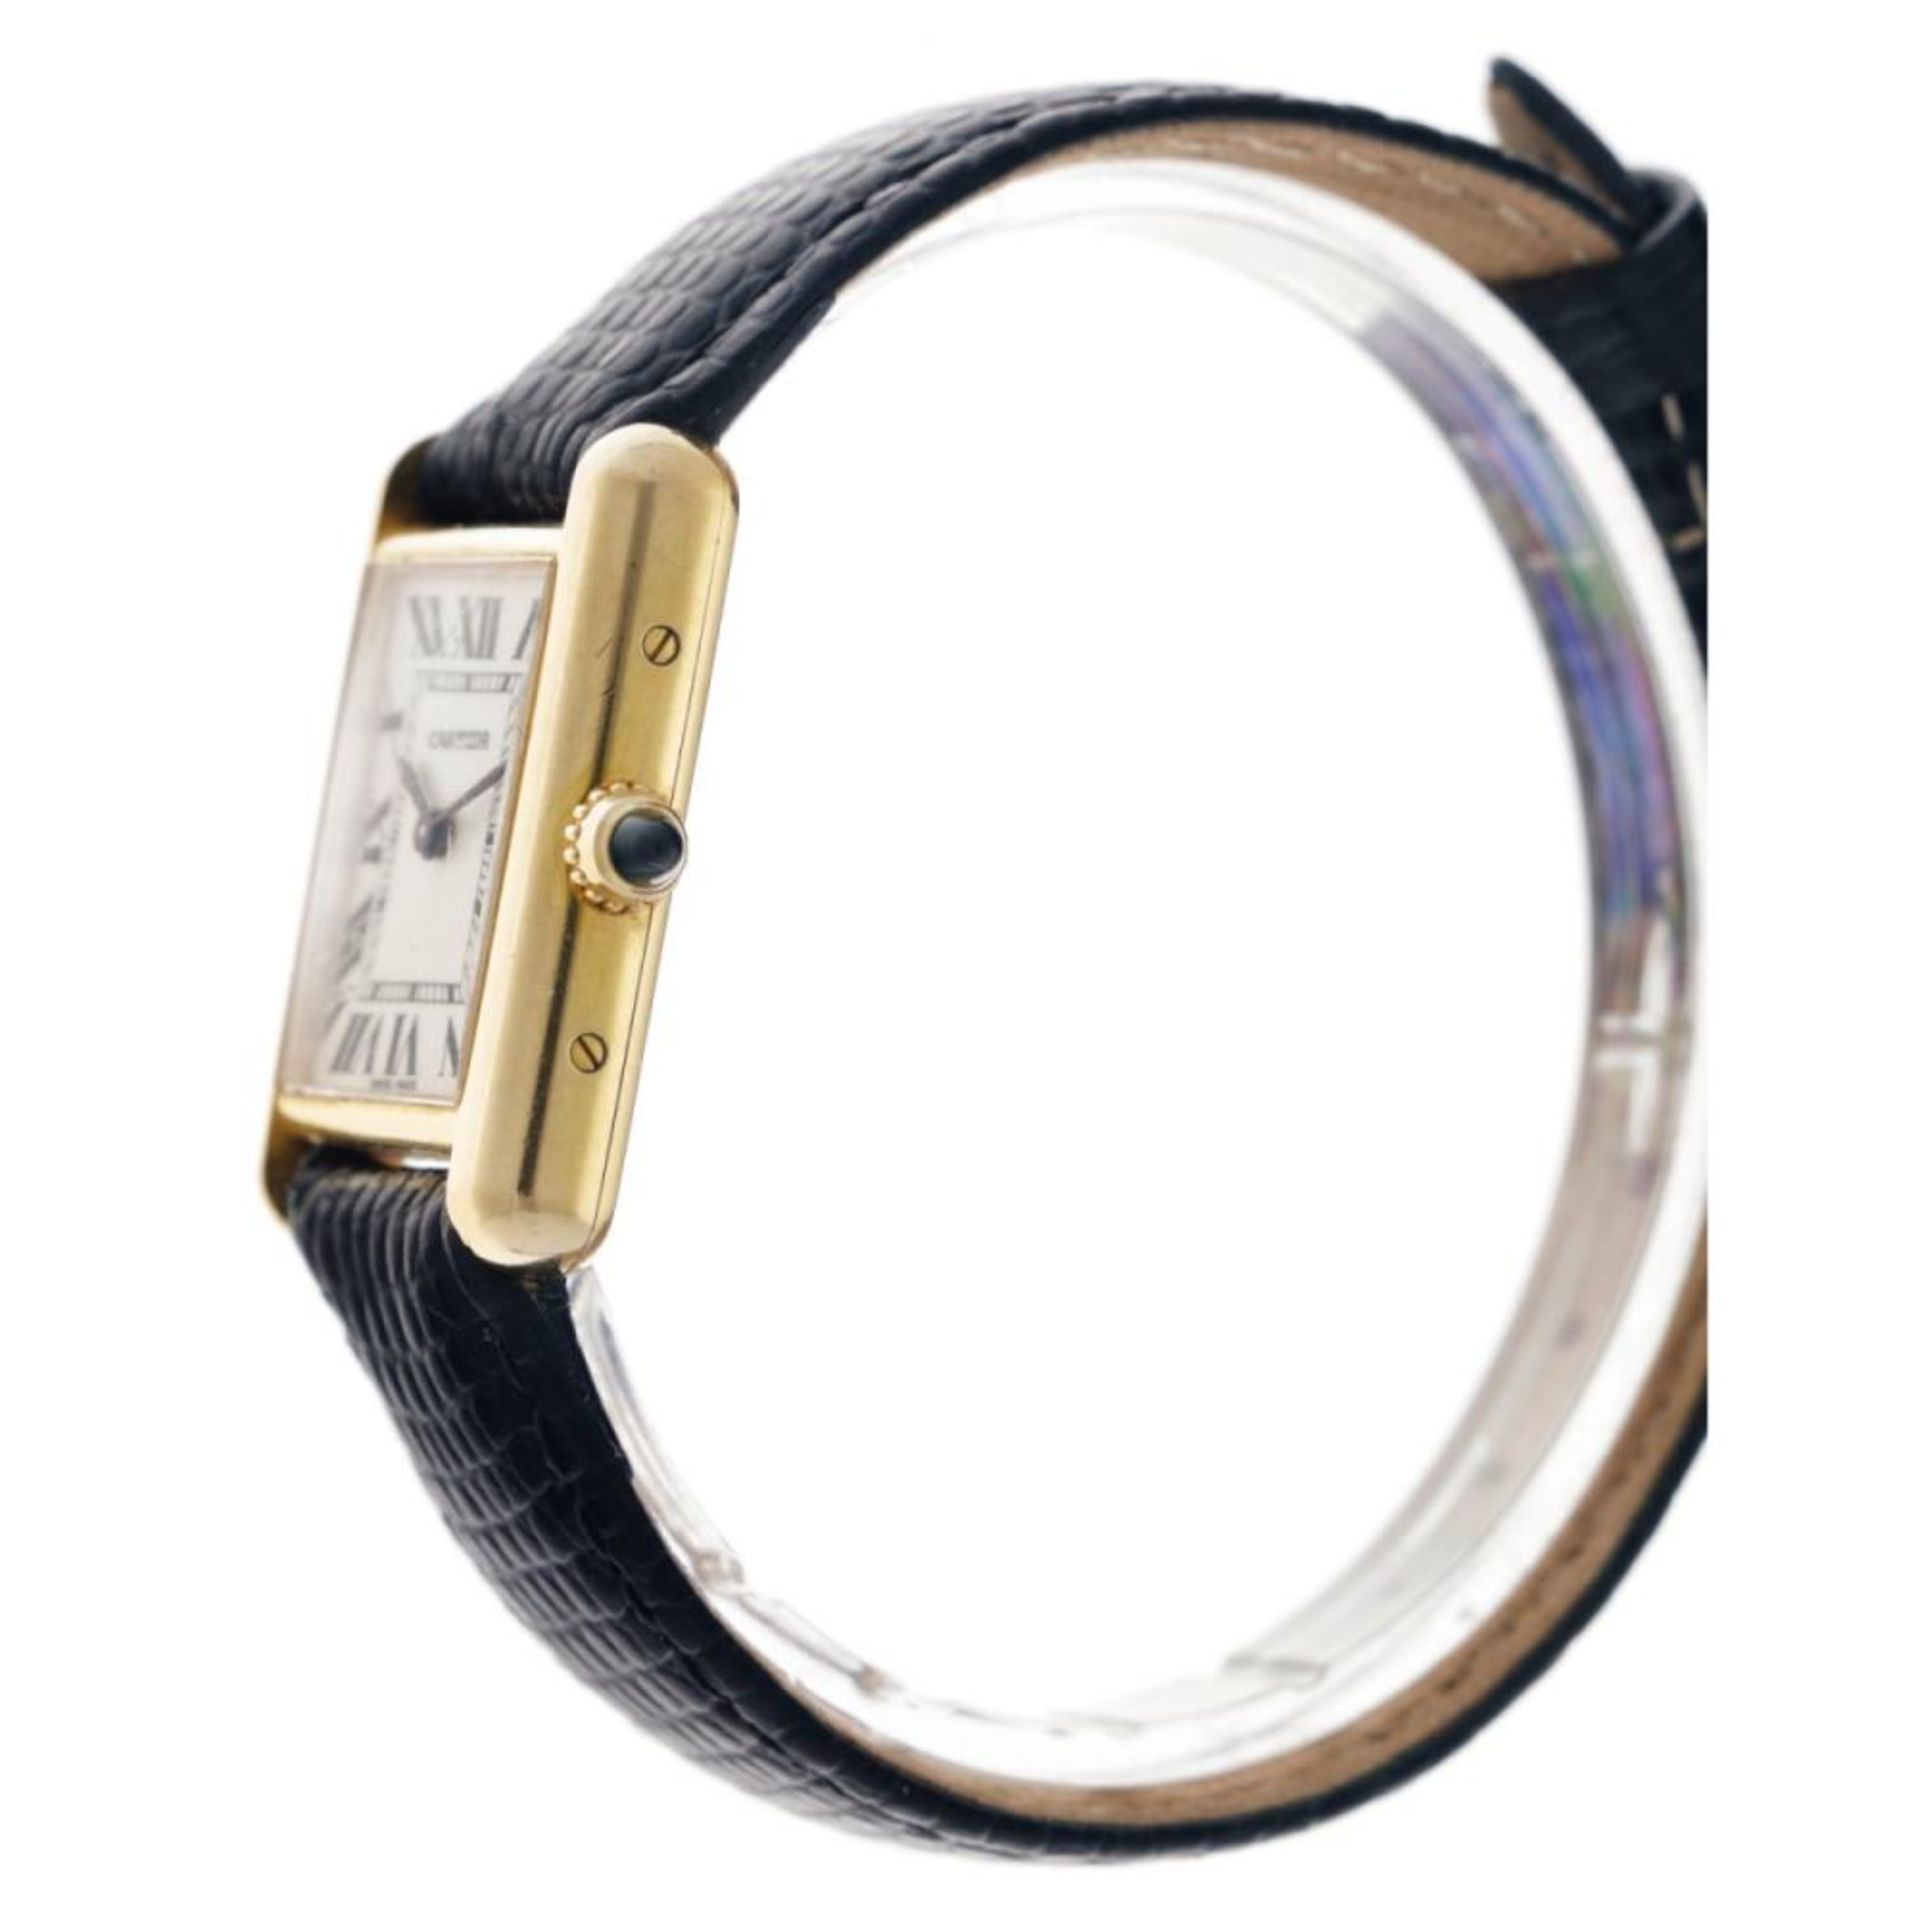 Cartier Tank Louis 2442 - 18 carat gold - Ladies watch - approx. 2010. - Image 10 of 10